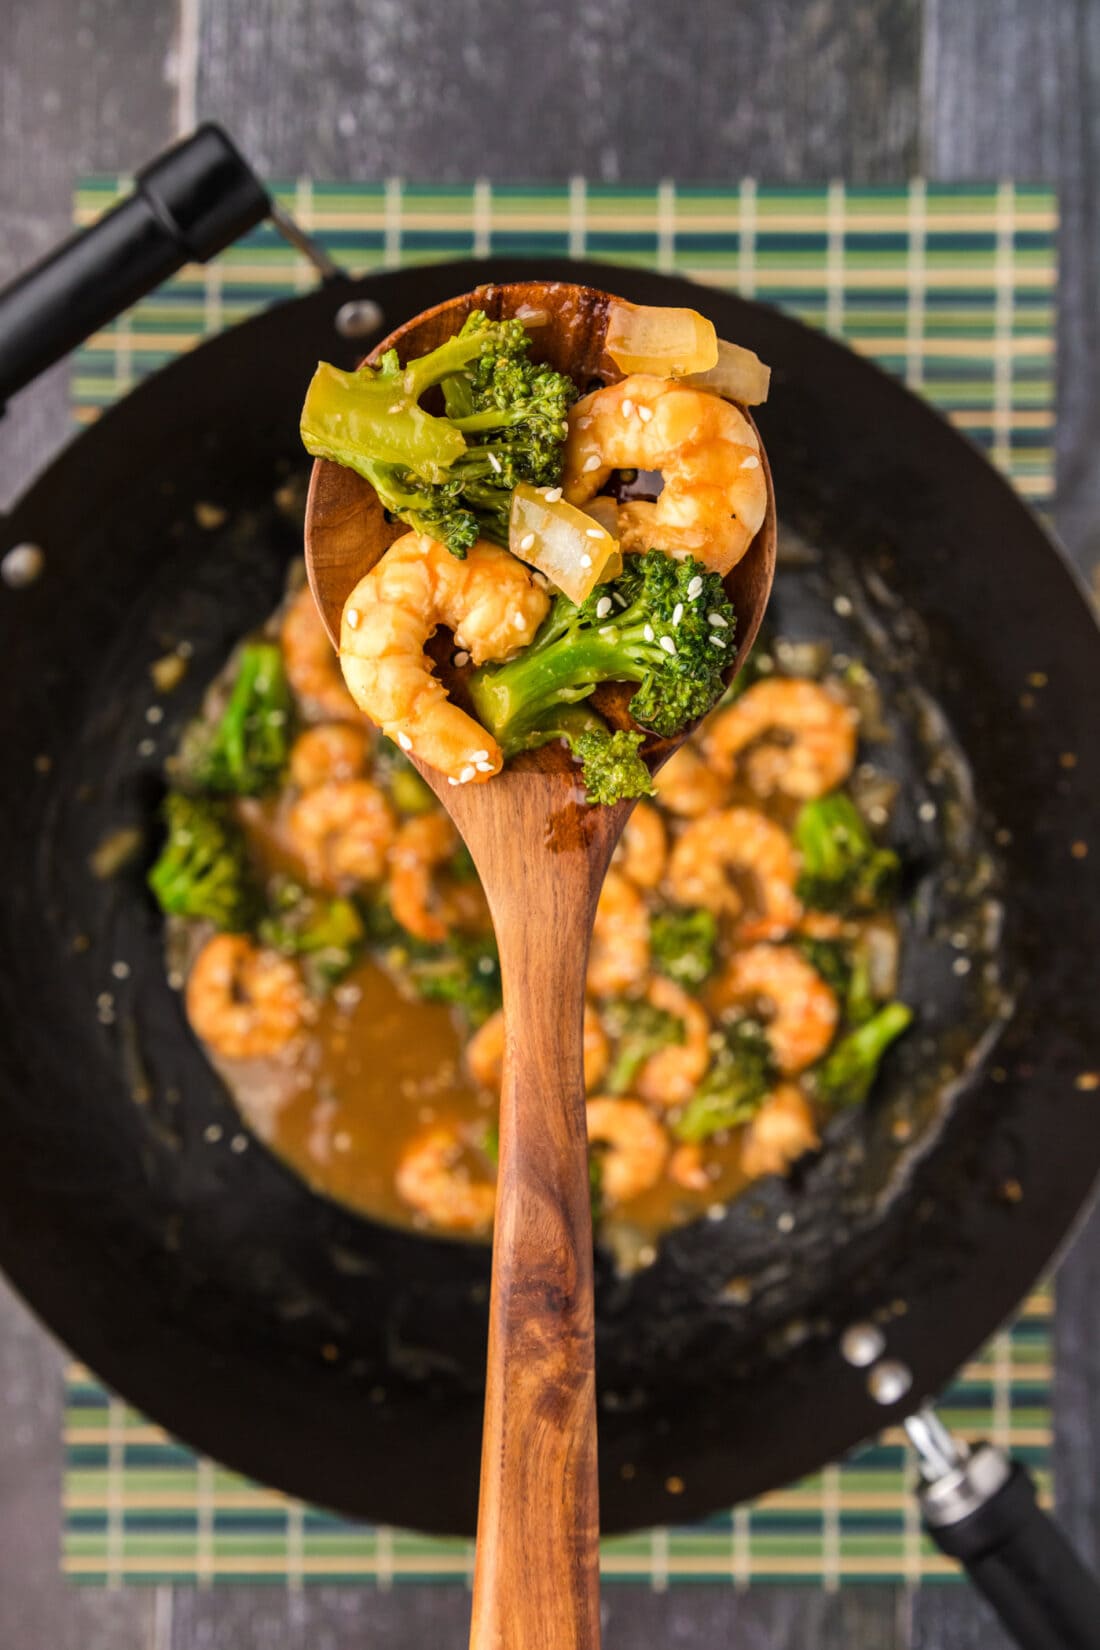 Spoon of Shrimp and Broccoli held above a wok of Shrimp and Broccoli